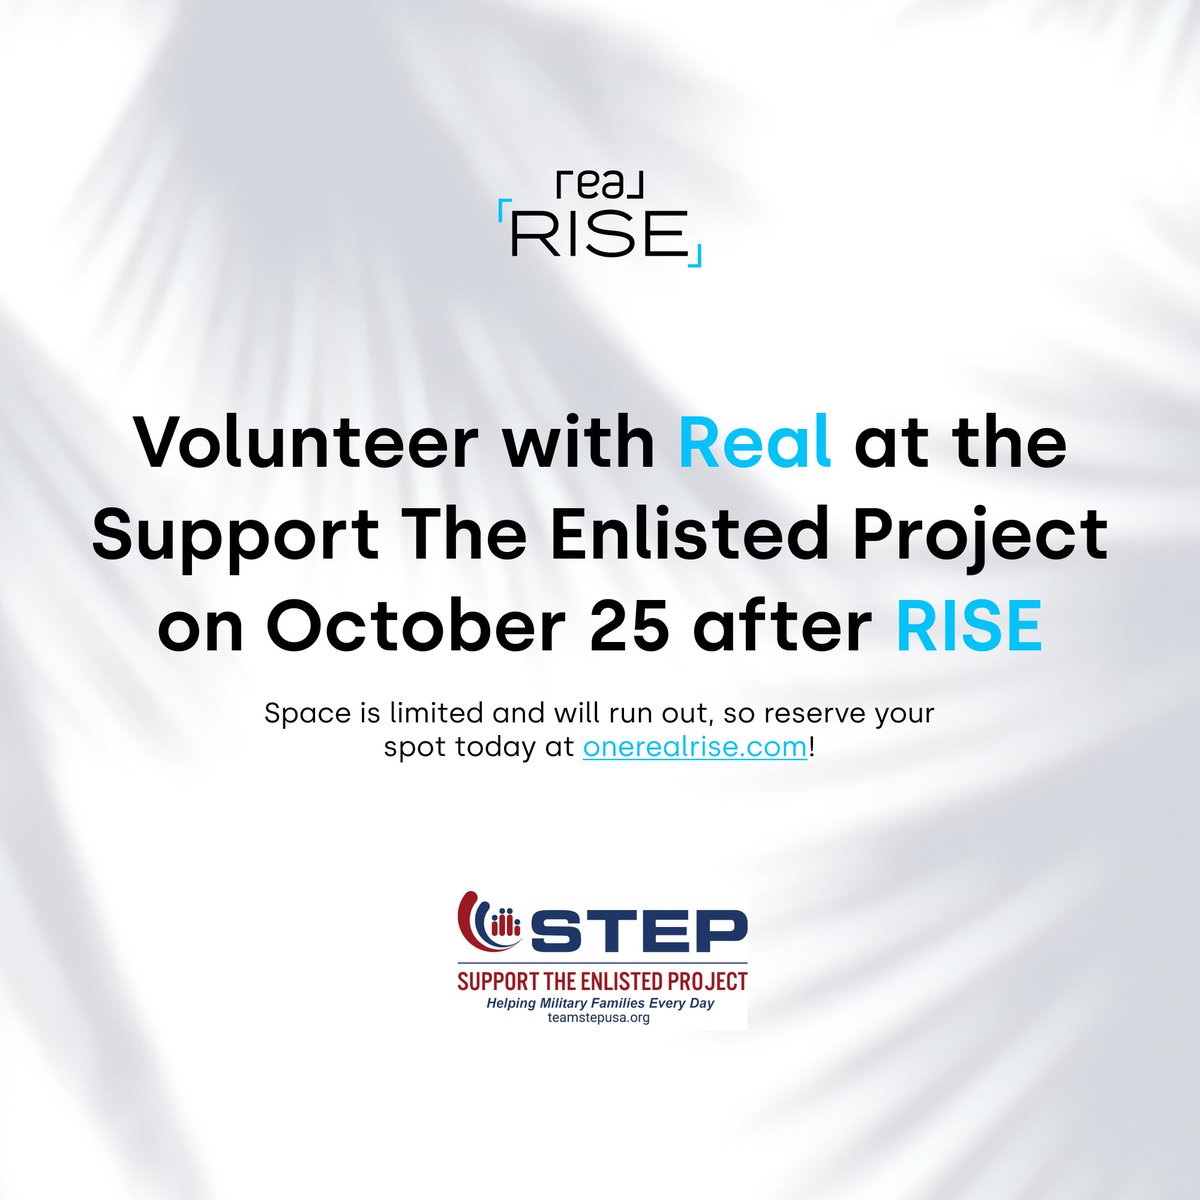 Join us for a volunteer opportunity with the Support The Enlisted Project (STEP) on Wednesday, Oct. 25 from 8:15 am to 12:30 pm

Register here: bit.ly/3RJiIxc

More info: bit.ly/3EV0H7z

@teamstepusa #RISE2023 #realbroker #therealbrokerage #workhardbekind $REAX